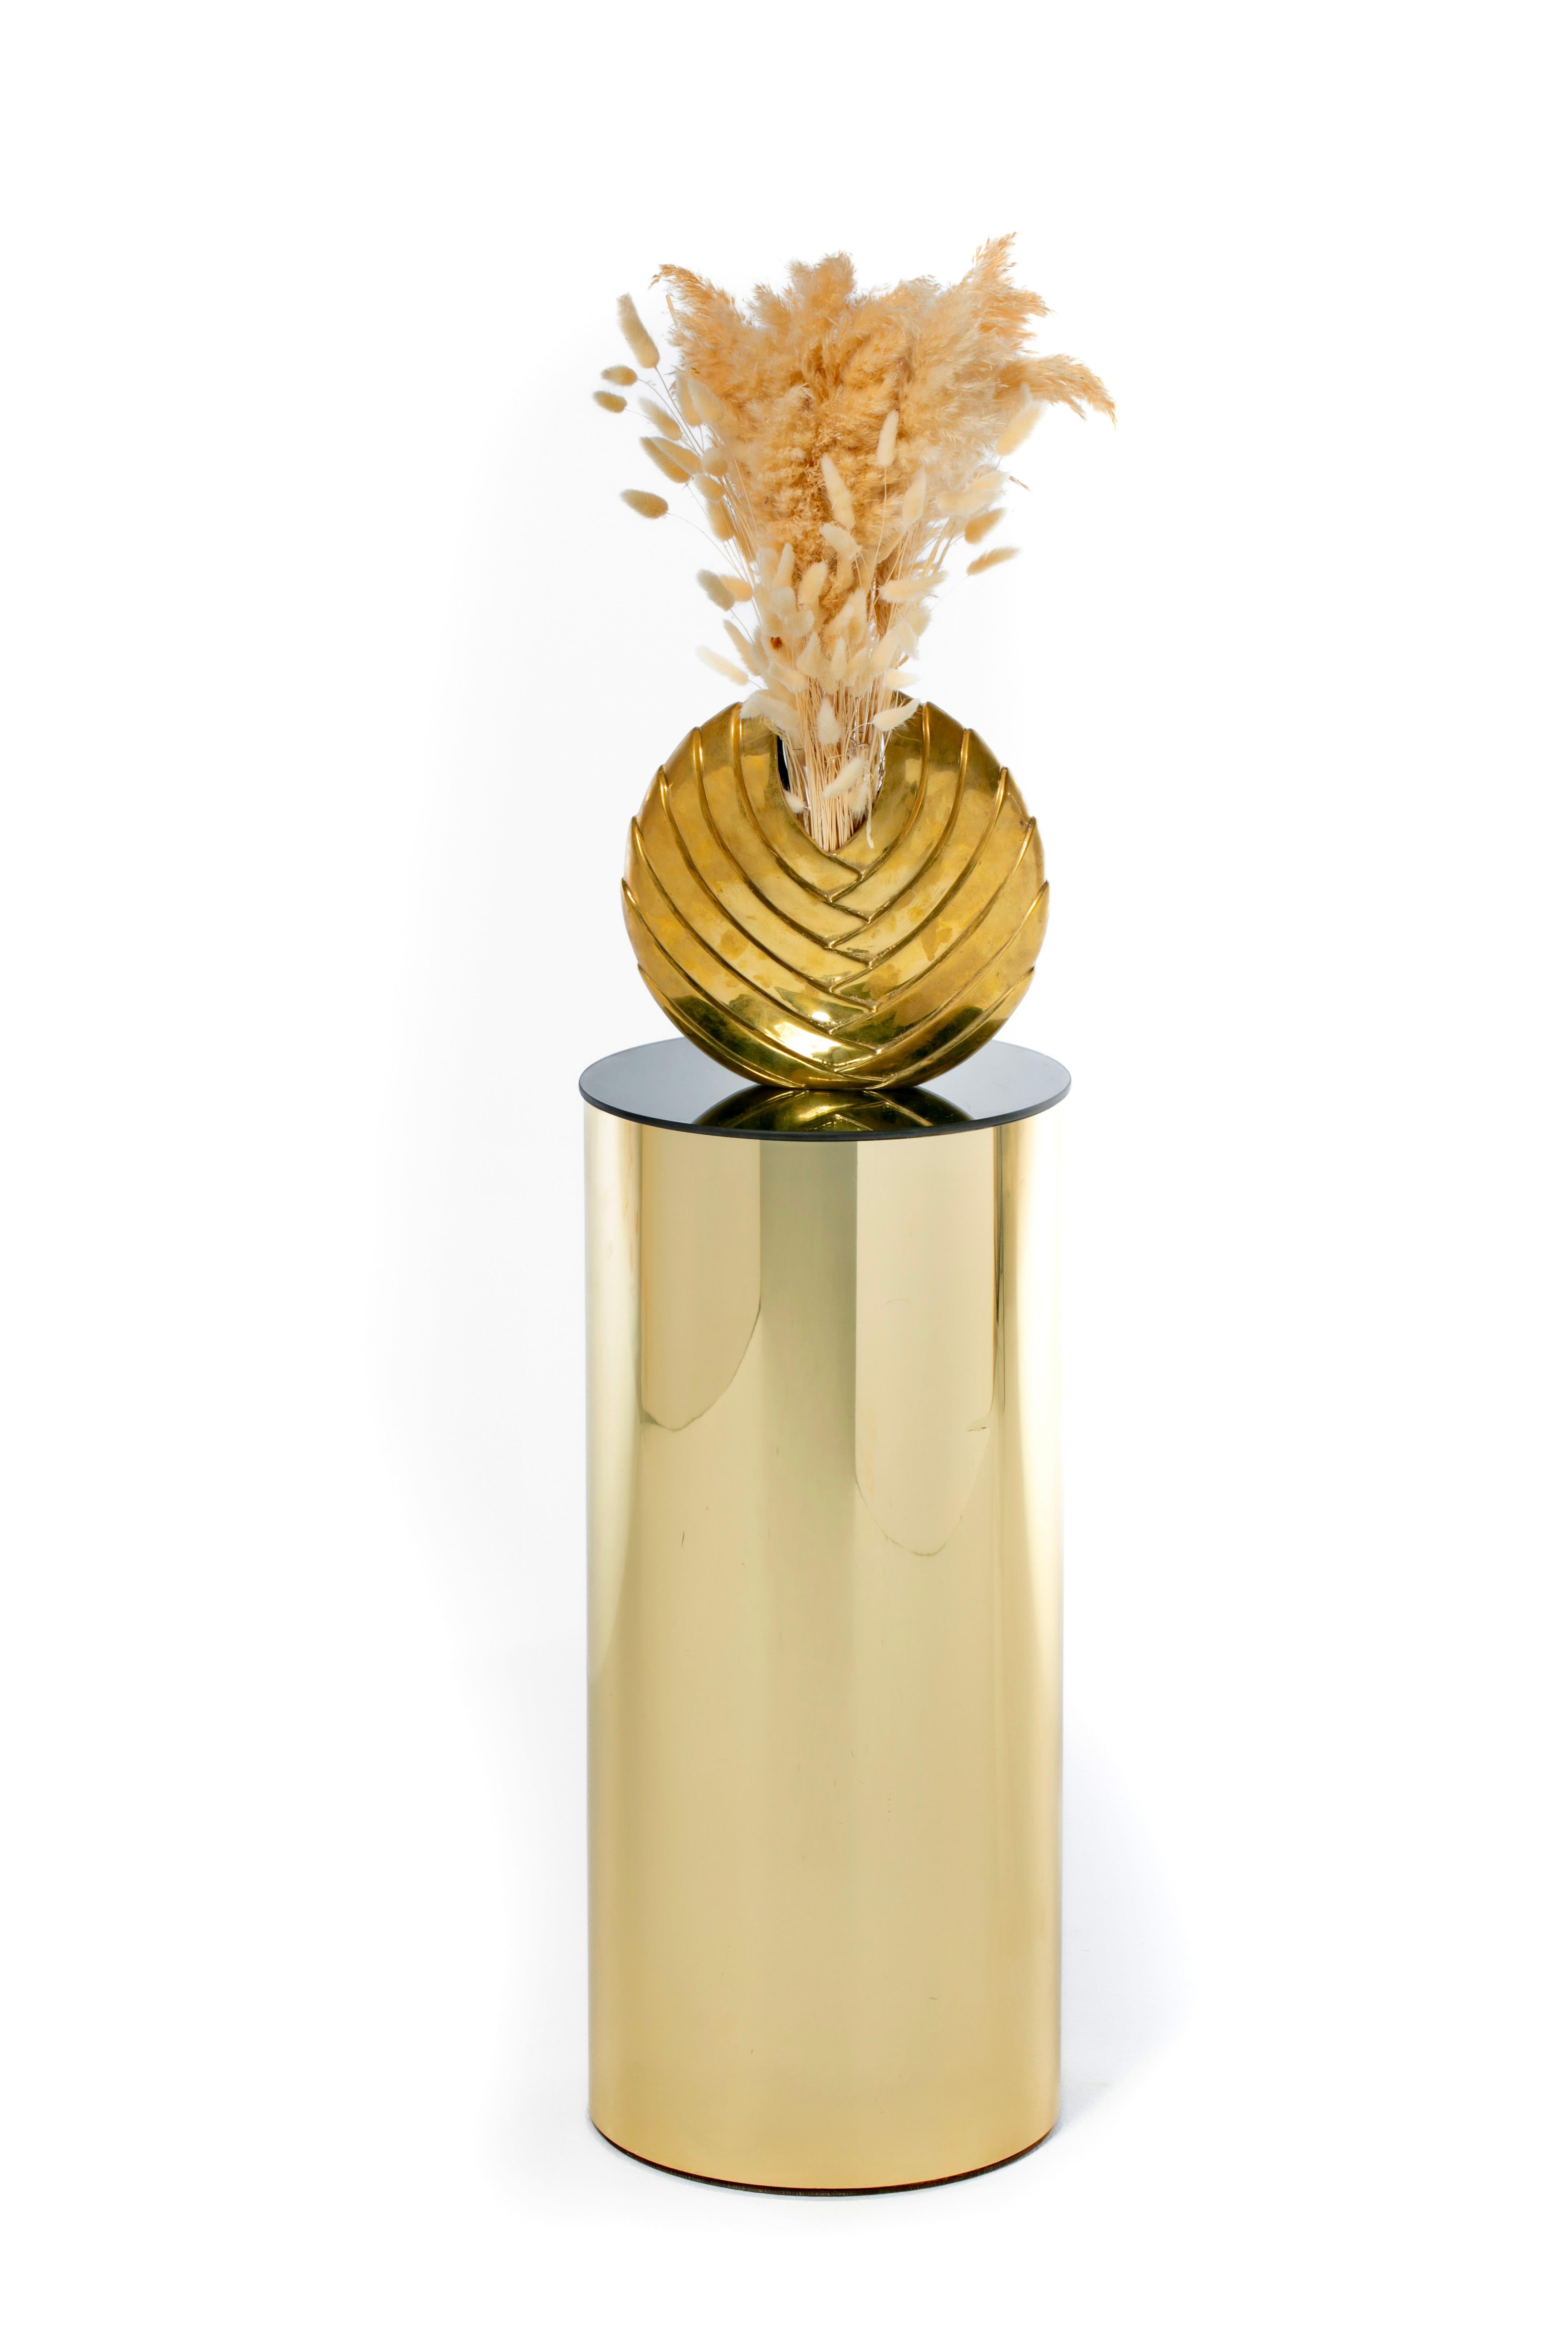 Post Modern Curtis Jere Circular Pedestal of Brass and Smoked Glass, c. 1984 For Sale 1